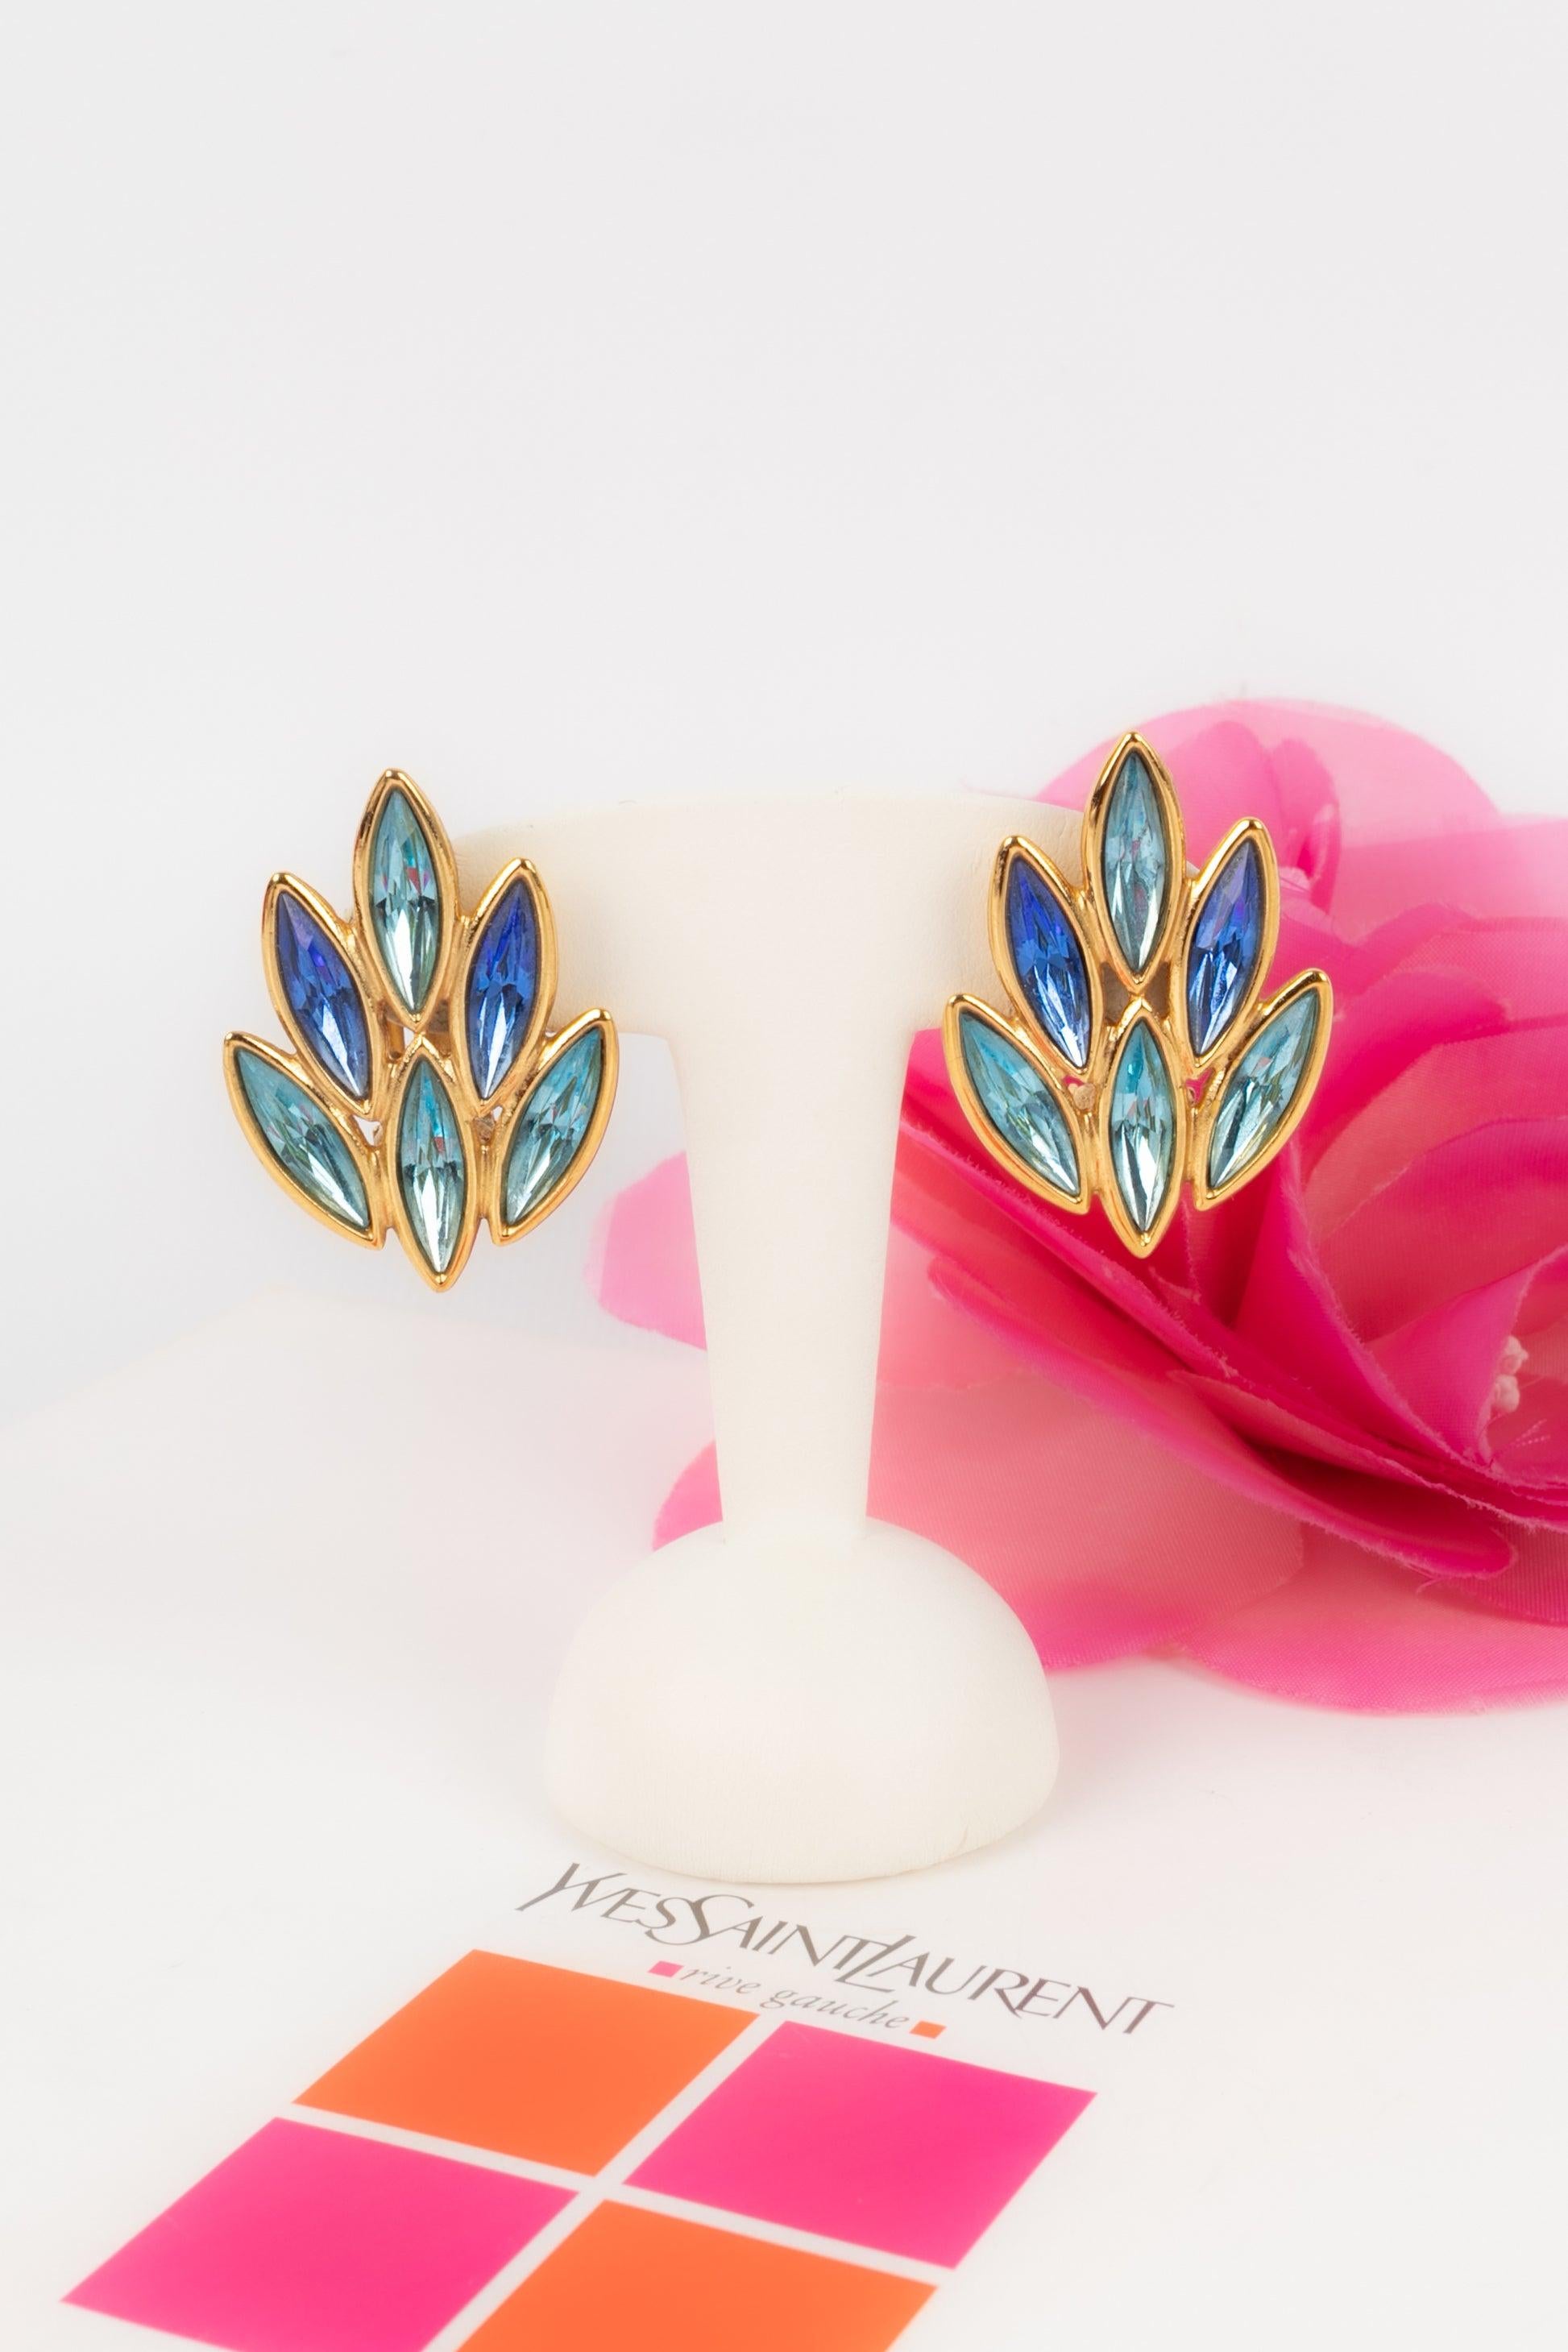 Yves Saint Laurent Golden Metal Clip-On Earrings with Blue Rhinestones For Sale 4